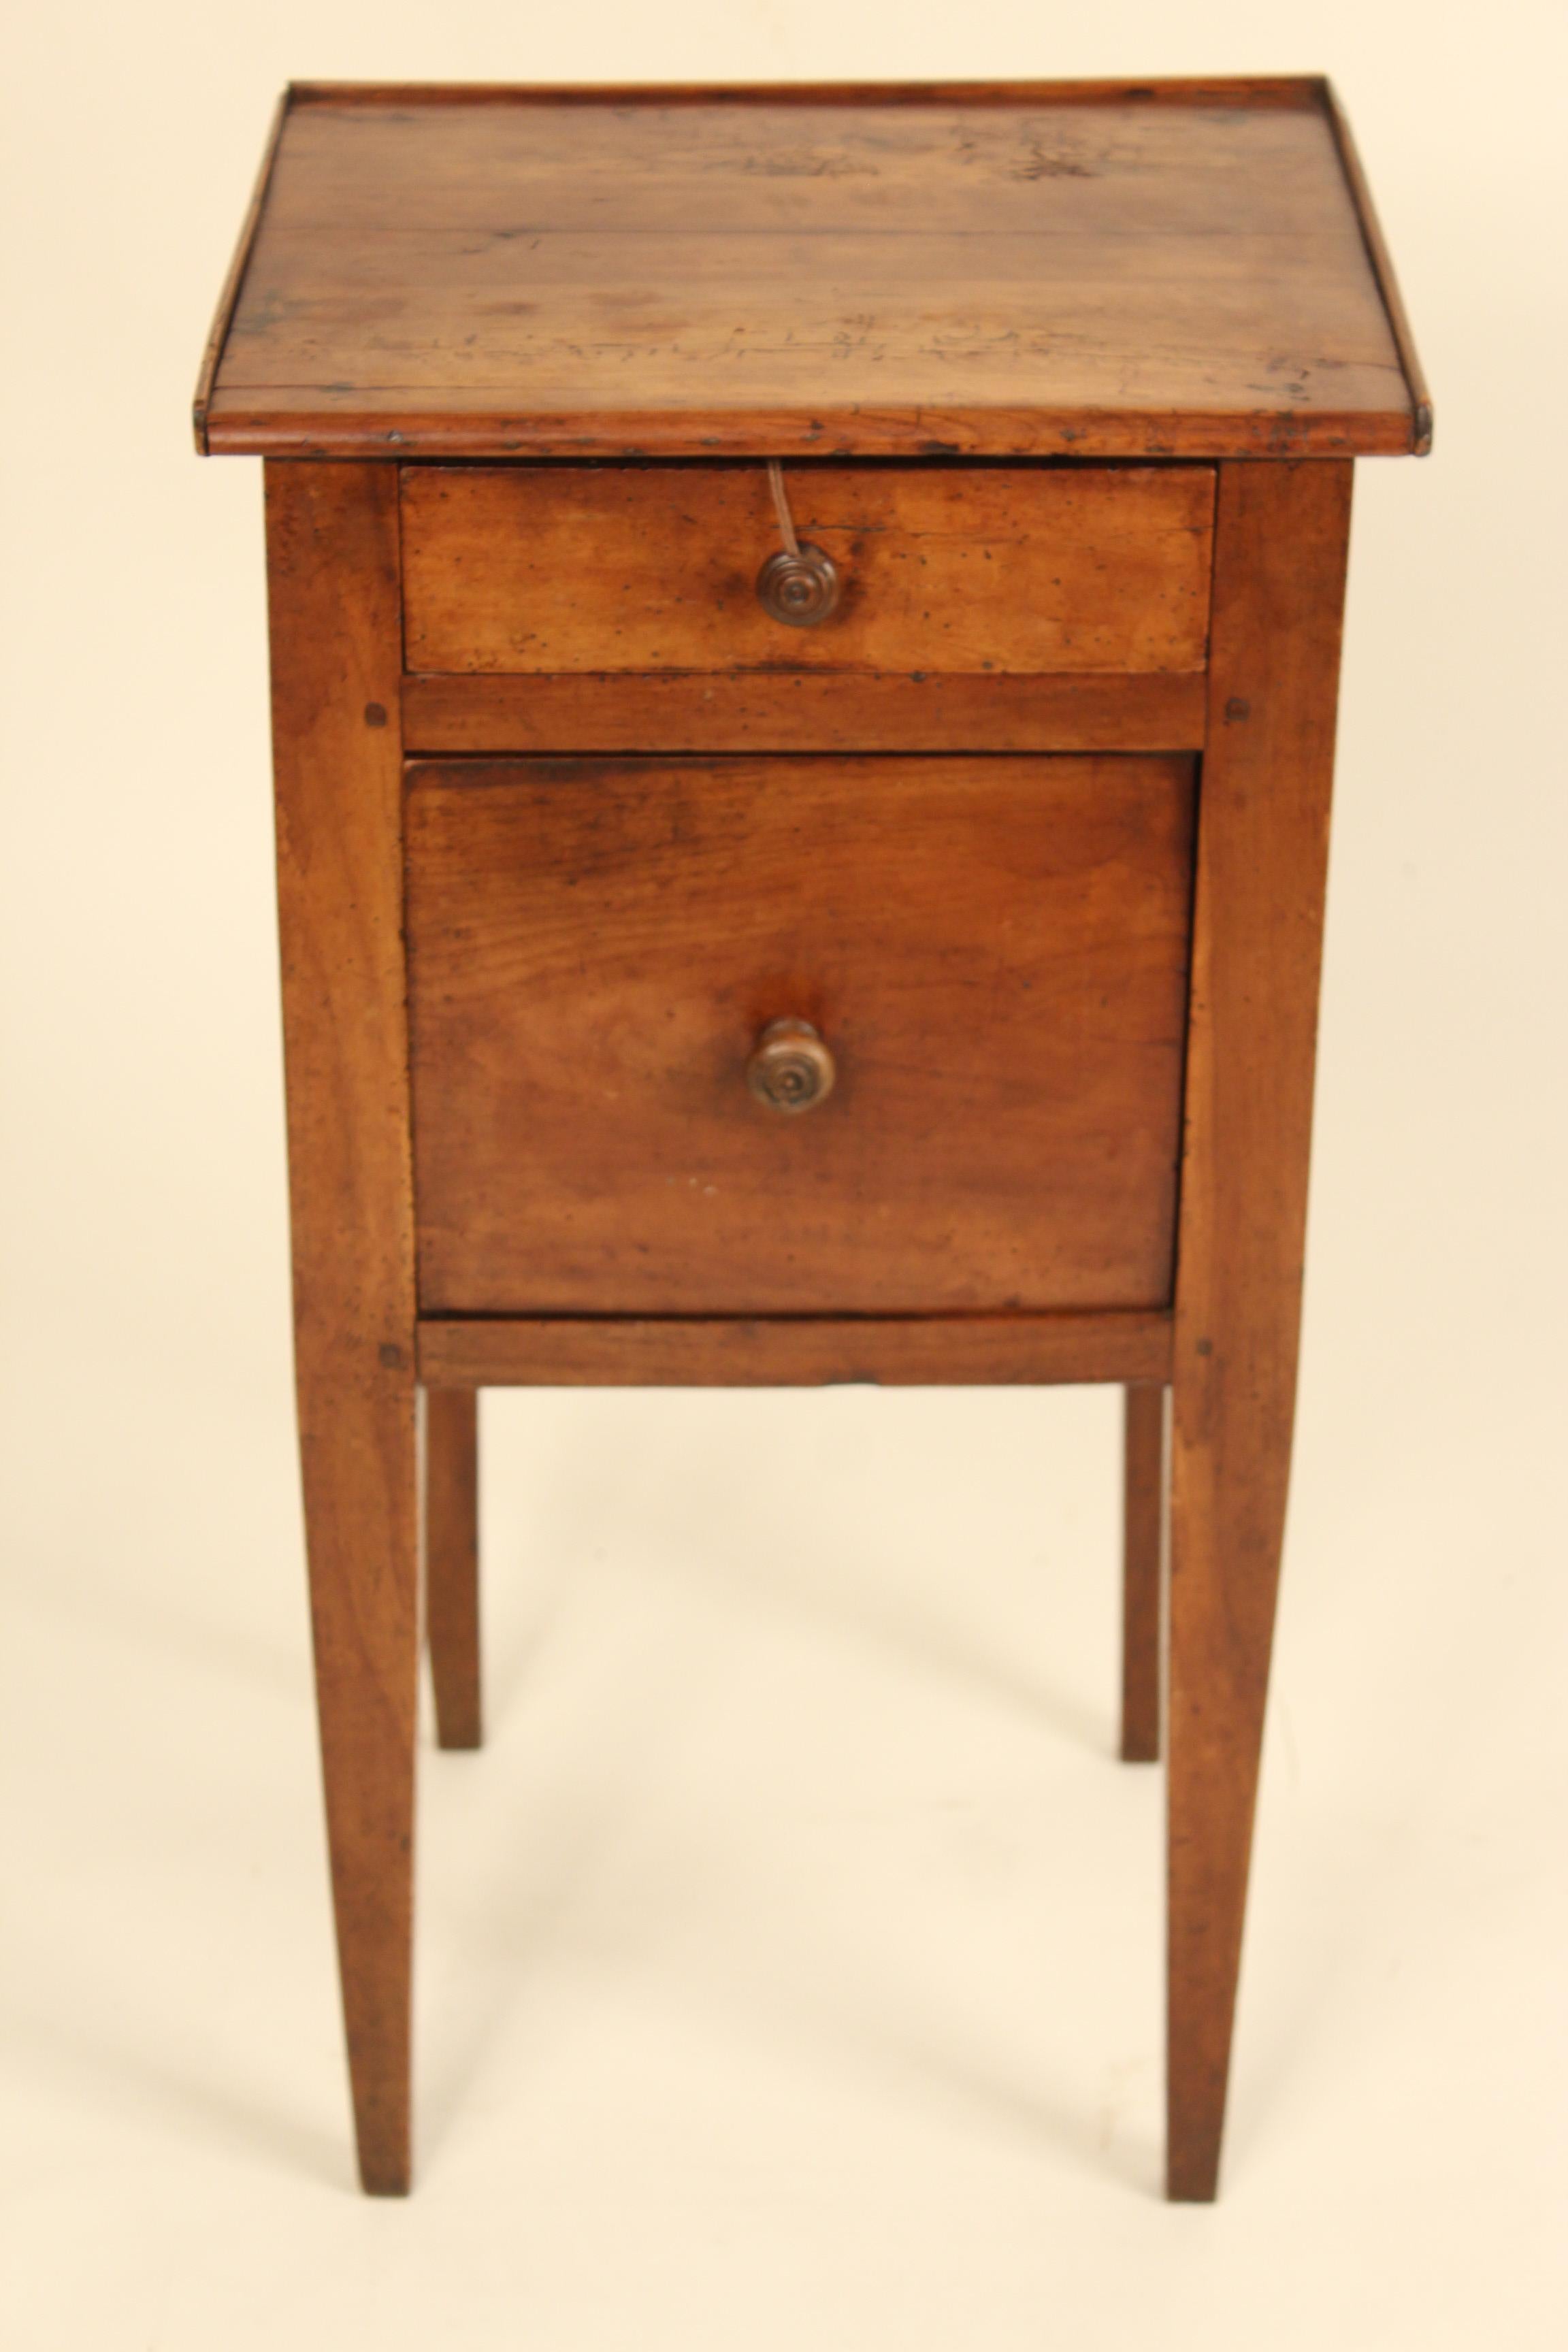 Directoire fruitwood occasional table, circa 1800. This table has nice old original fruit wood color and mortise and tenon joinery. There is one-drawer and one door.